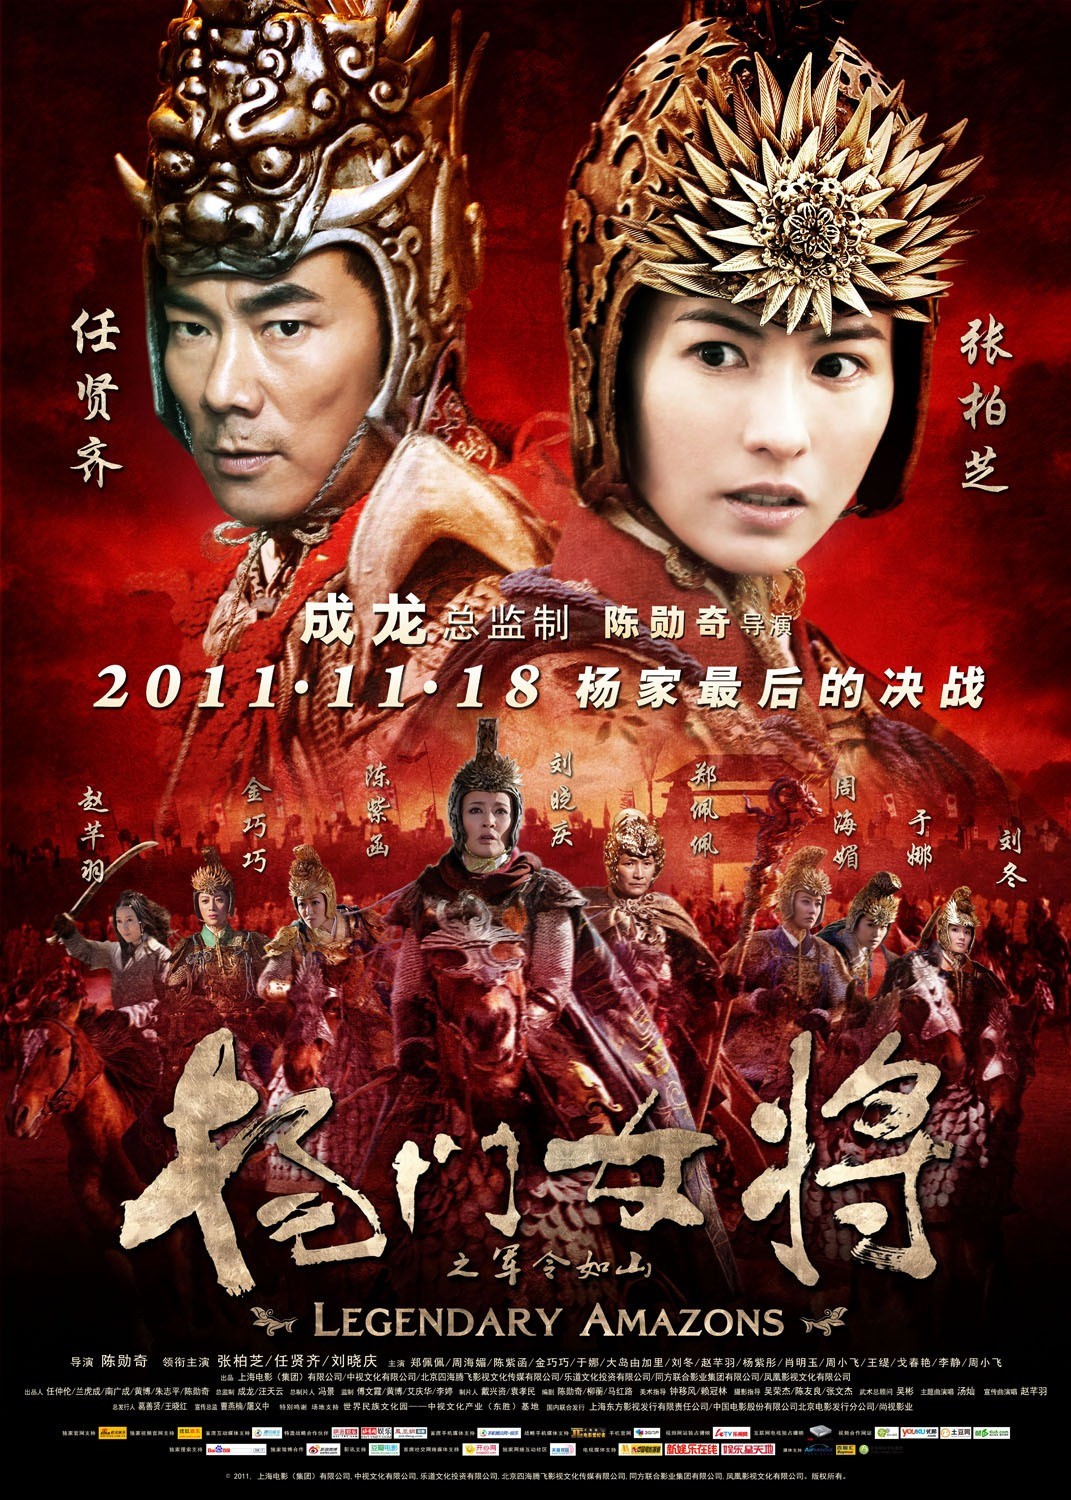 Extra Large Movie Poster Image for Legendary Amazons (#7 of 7)